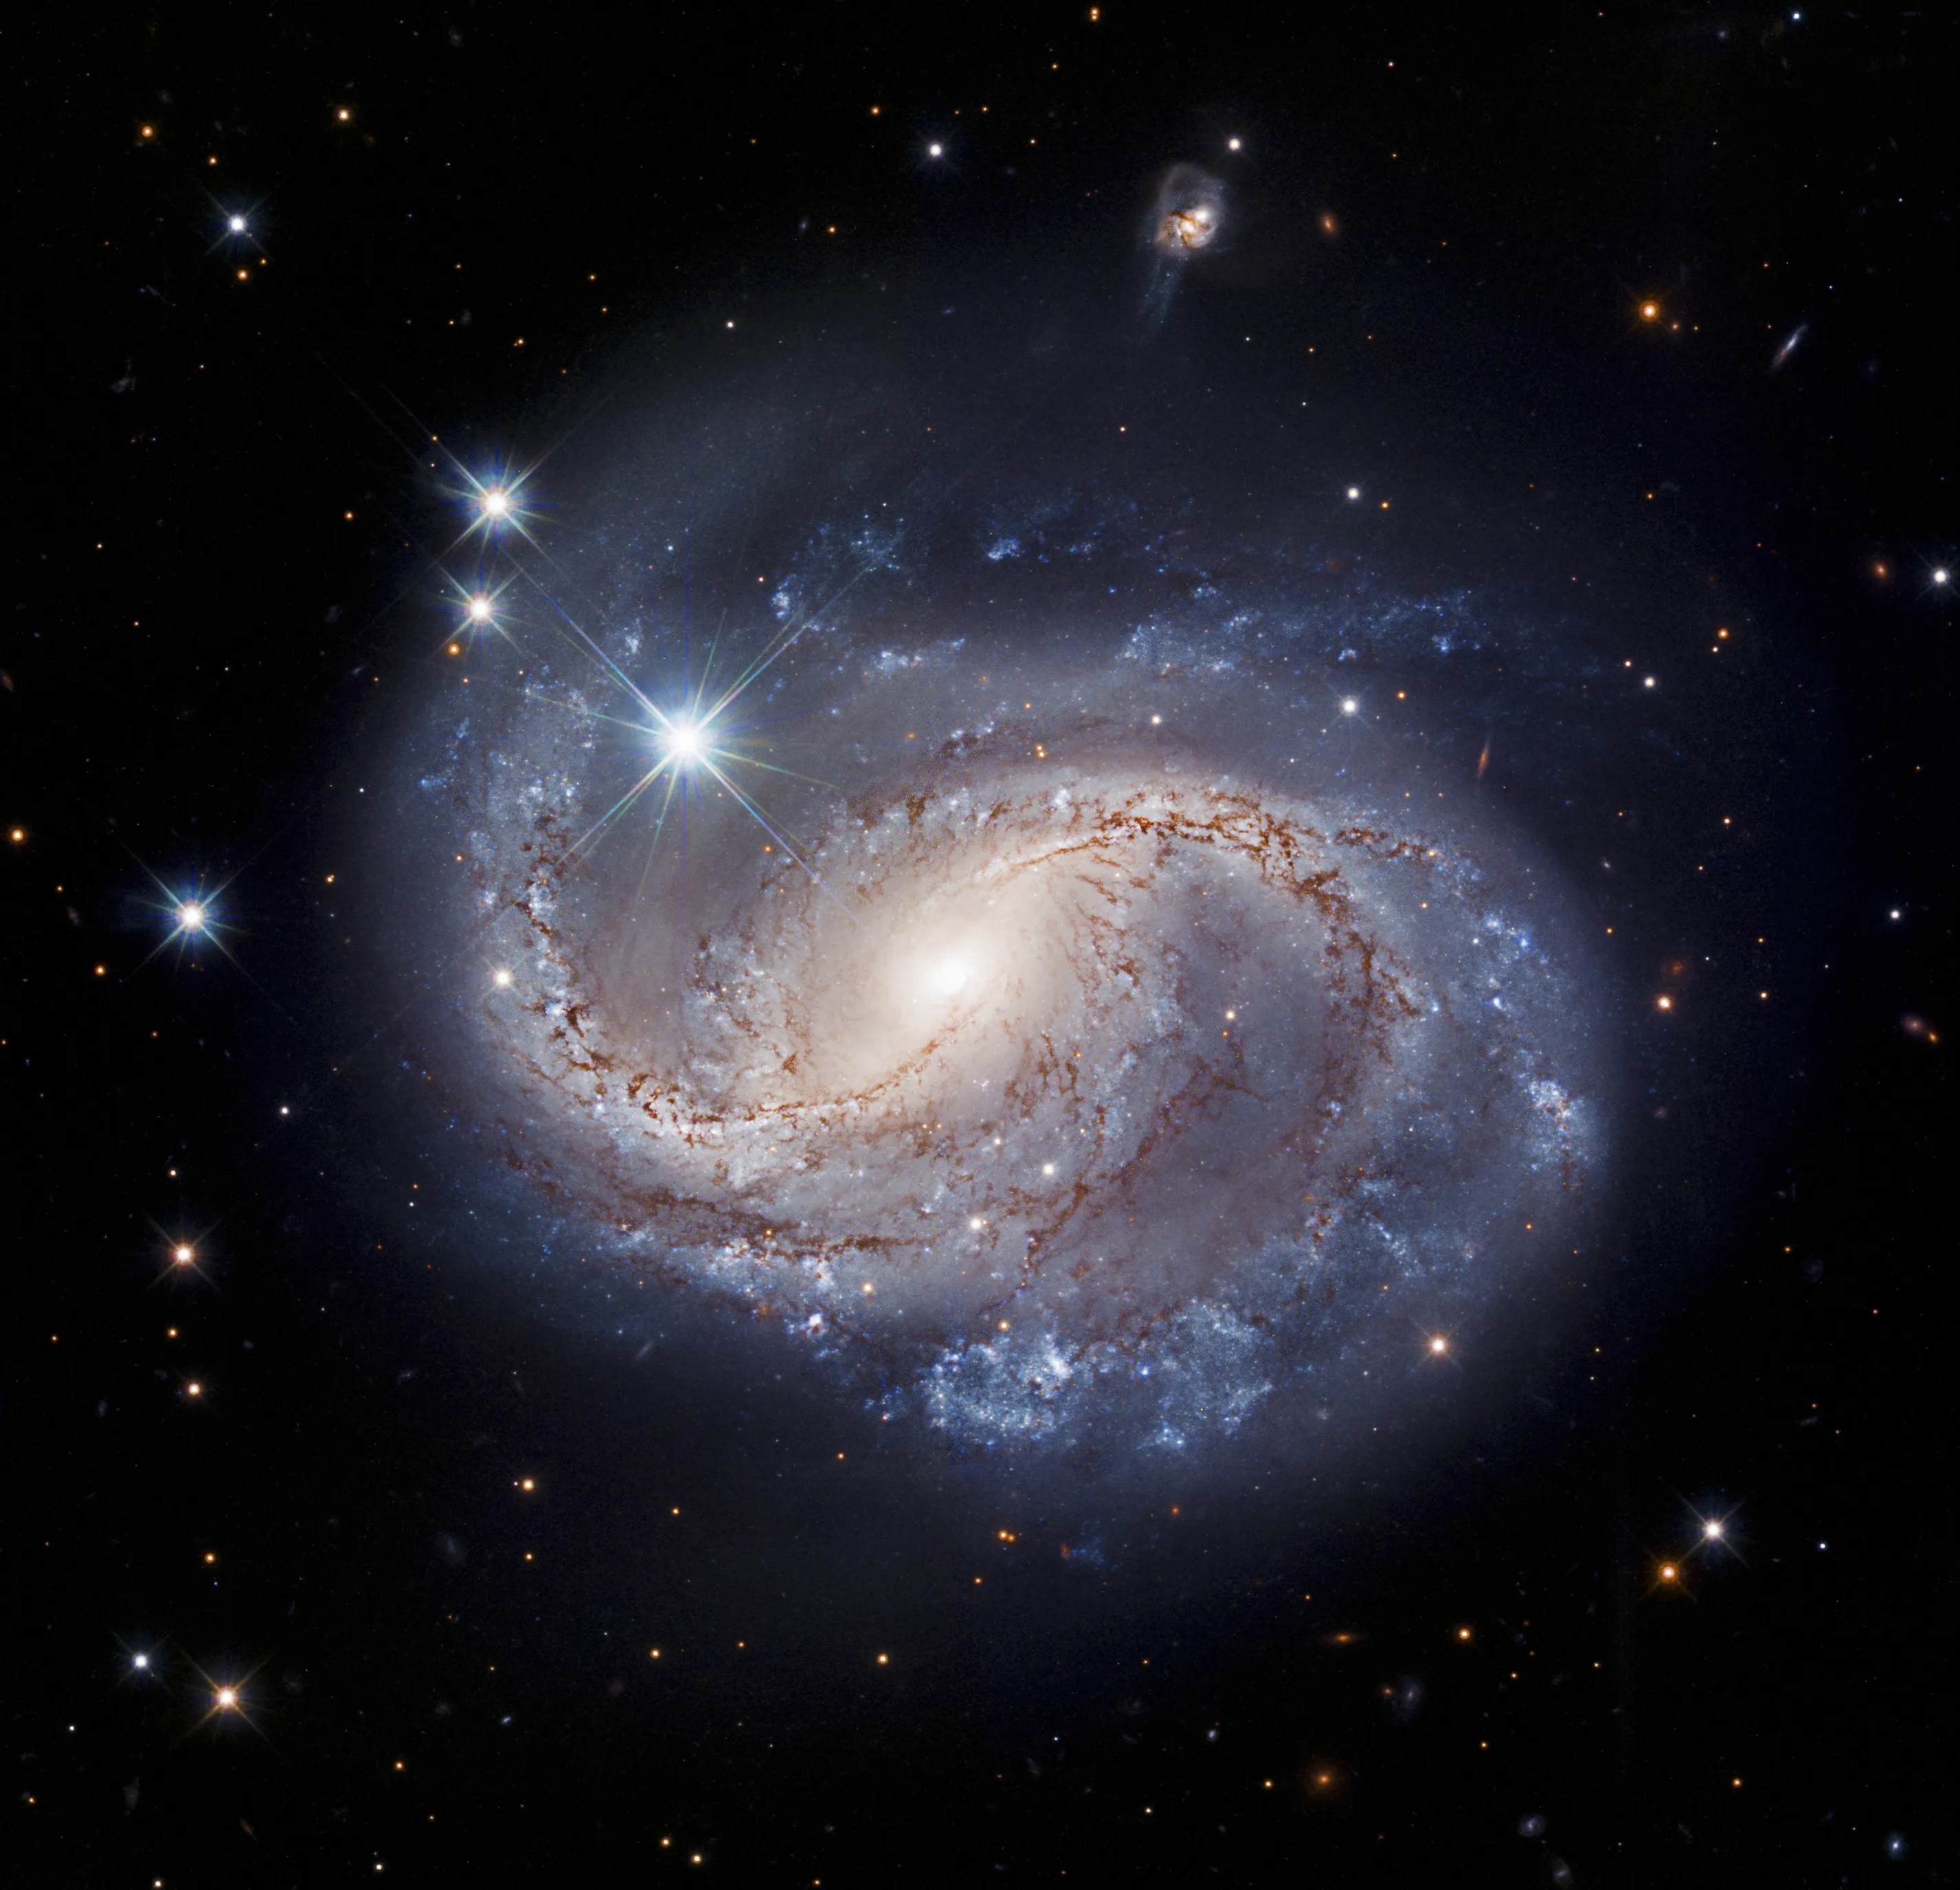 Image center: blue, and pinkish-white swirls of the barred spiral galaxy ngc 6956. dark, reddish-brown dust lanes along the inner part of the spiral arms. inky black background with foreground and distant stars and galaxies.